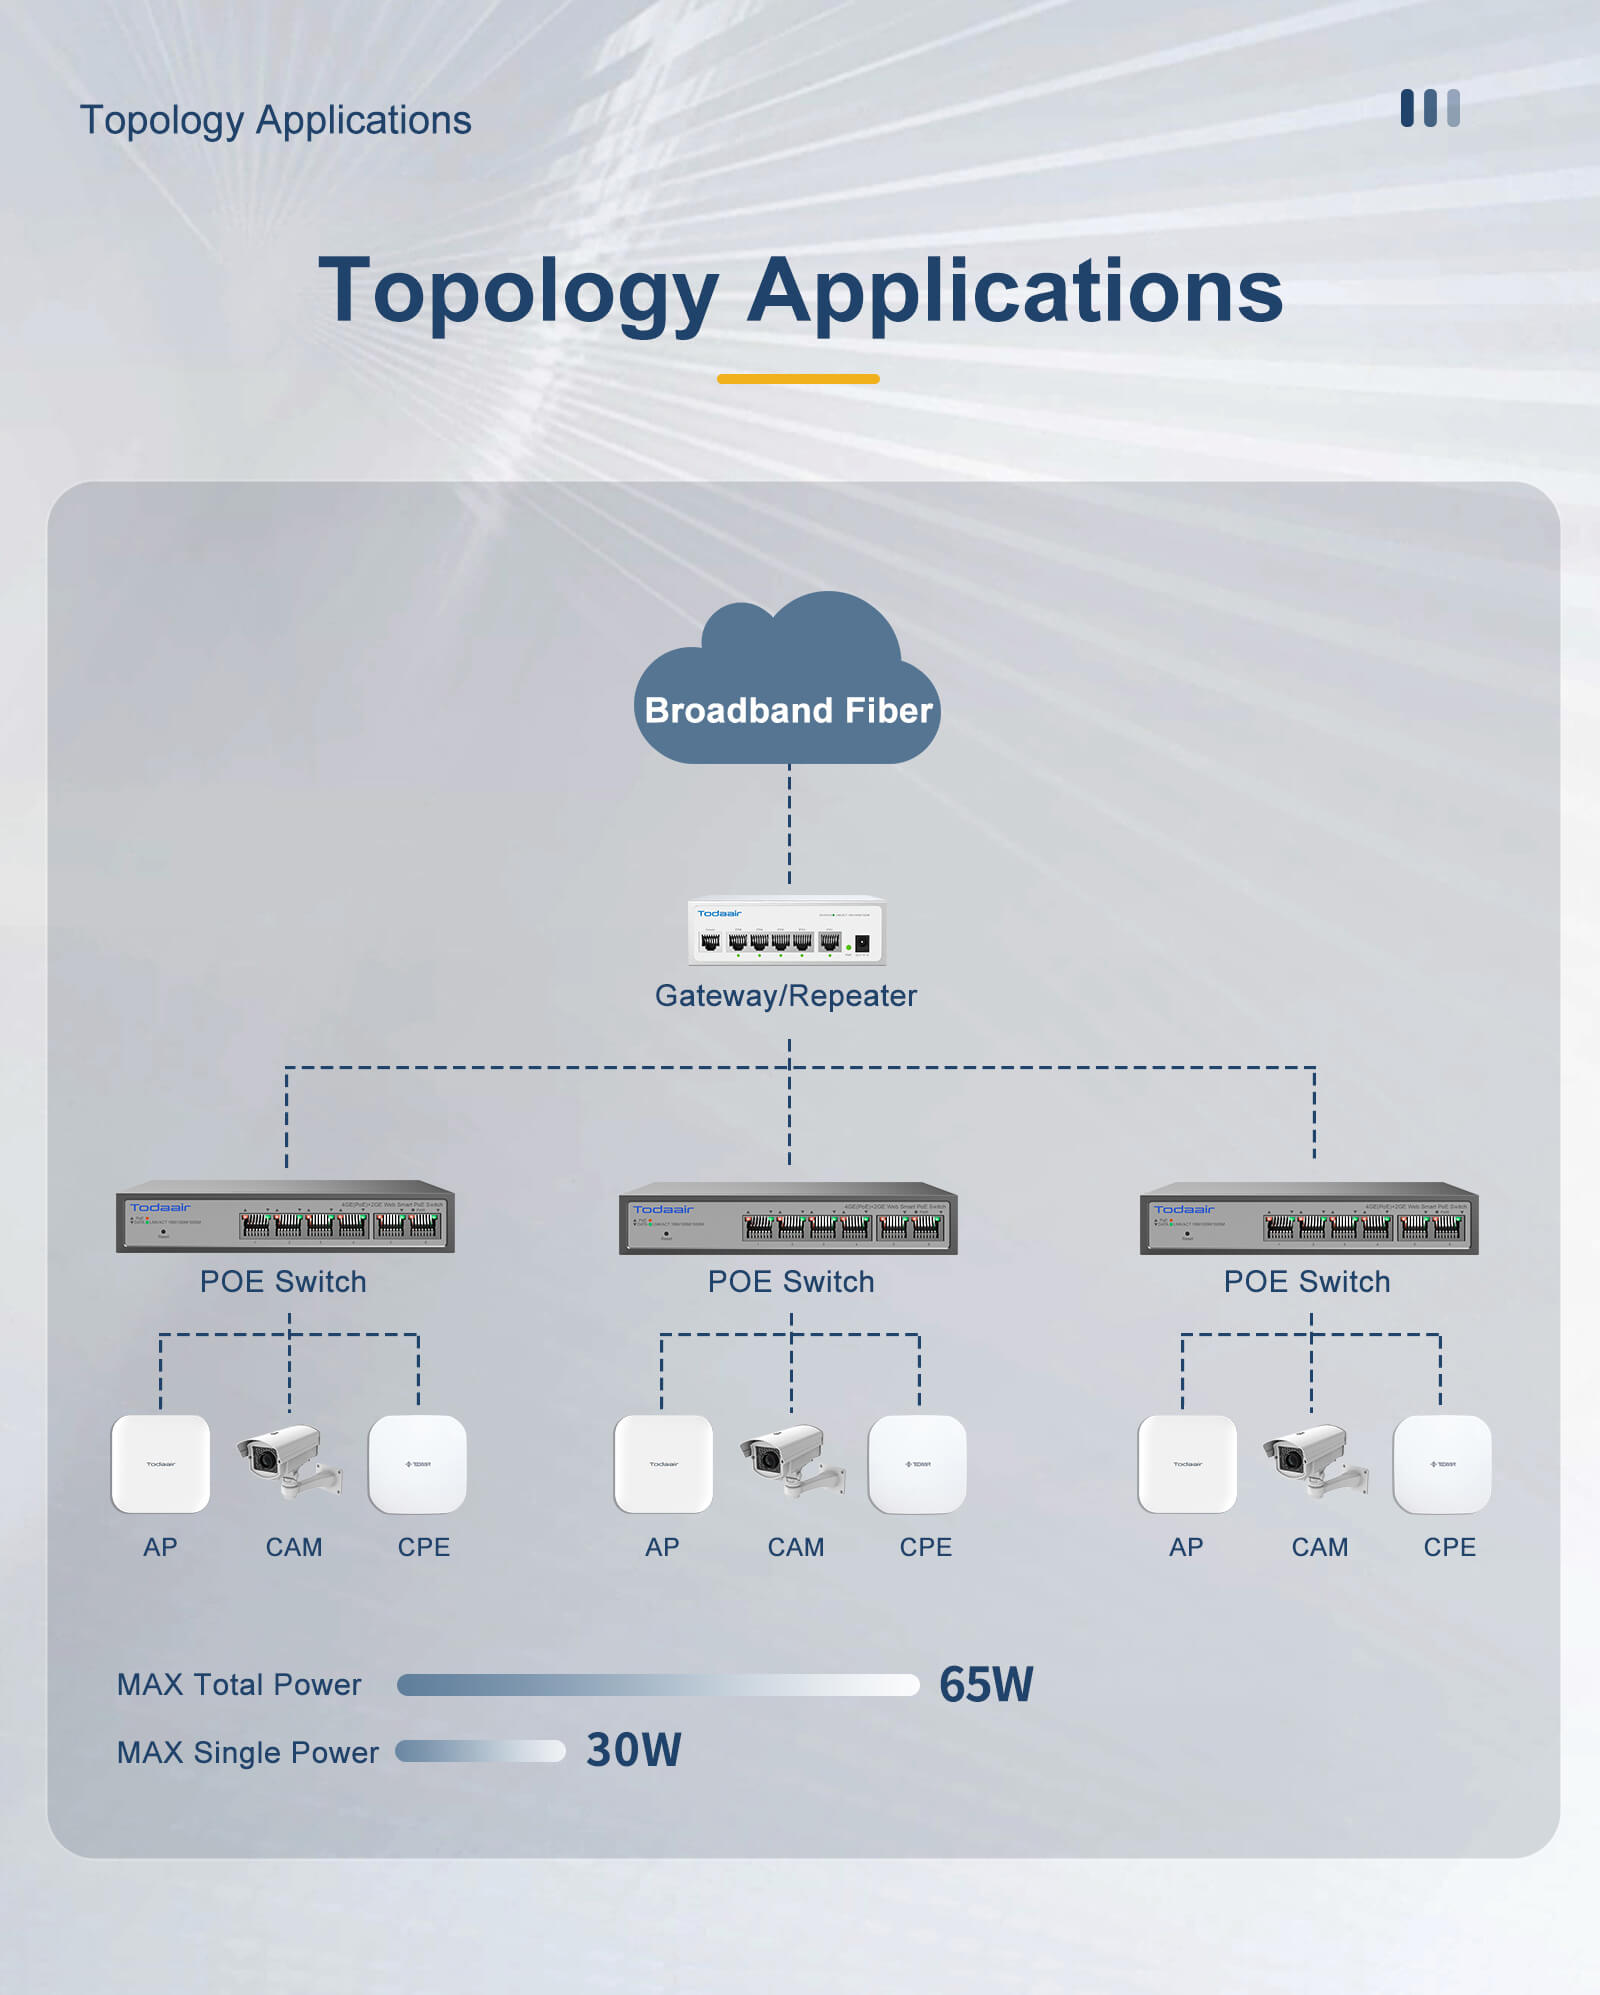 Todaair poe network switch topology application